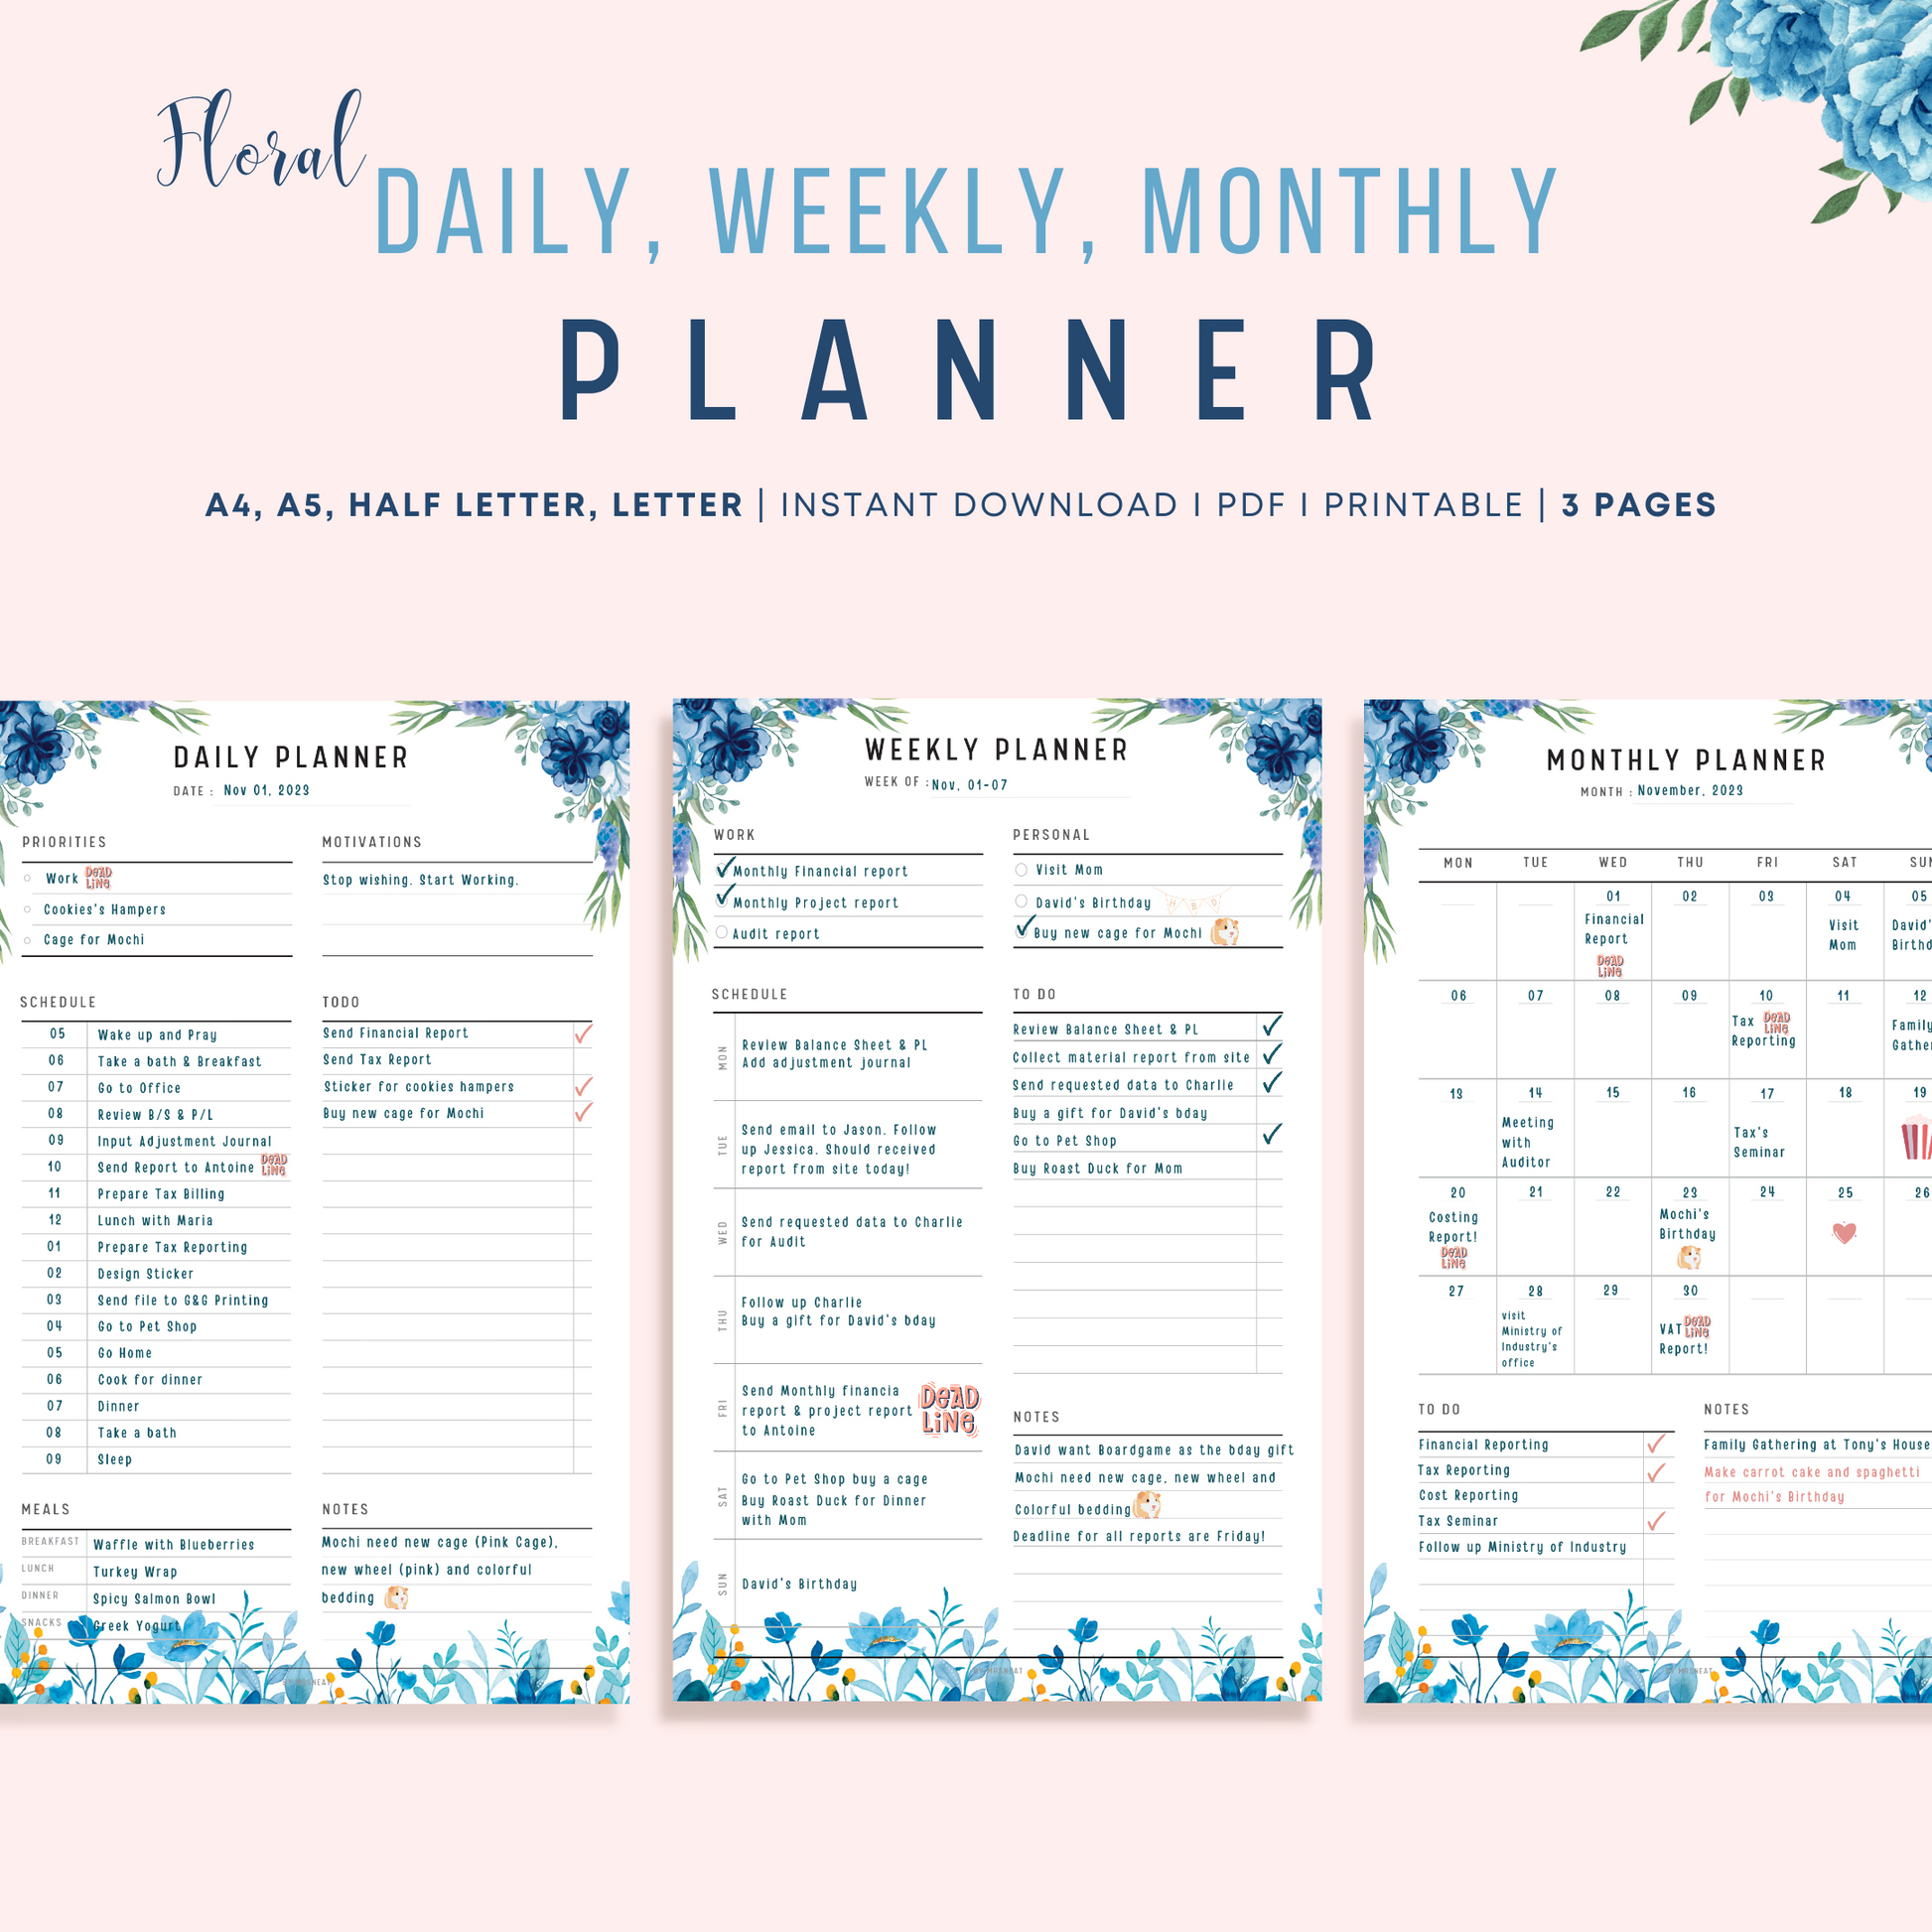 Blue Floral Daily, Weekly, Monthly Planner Printable in Minimalist Design